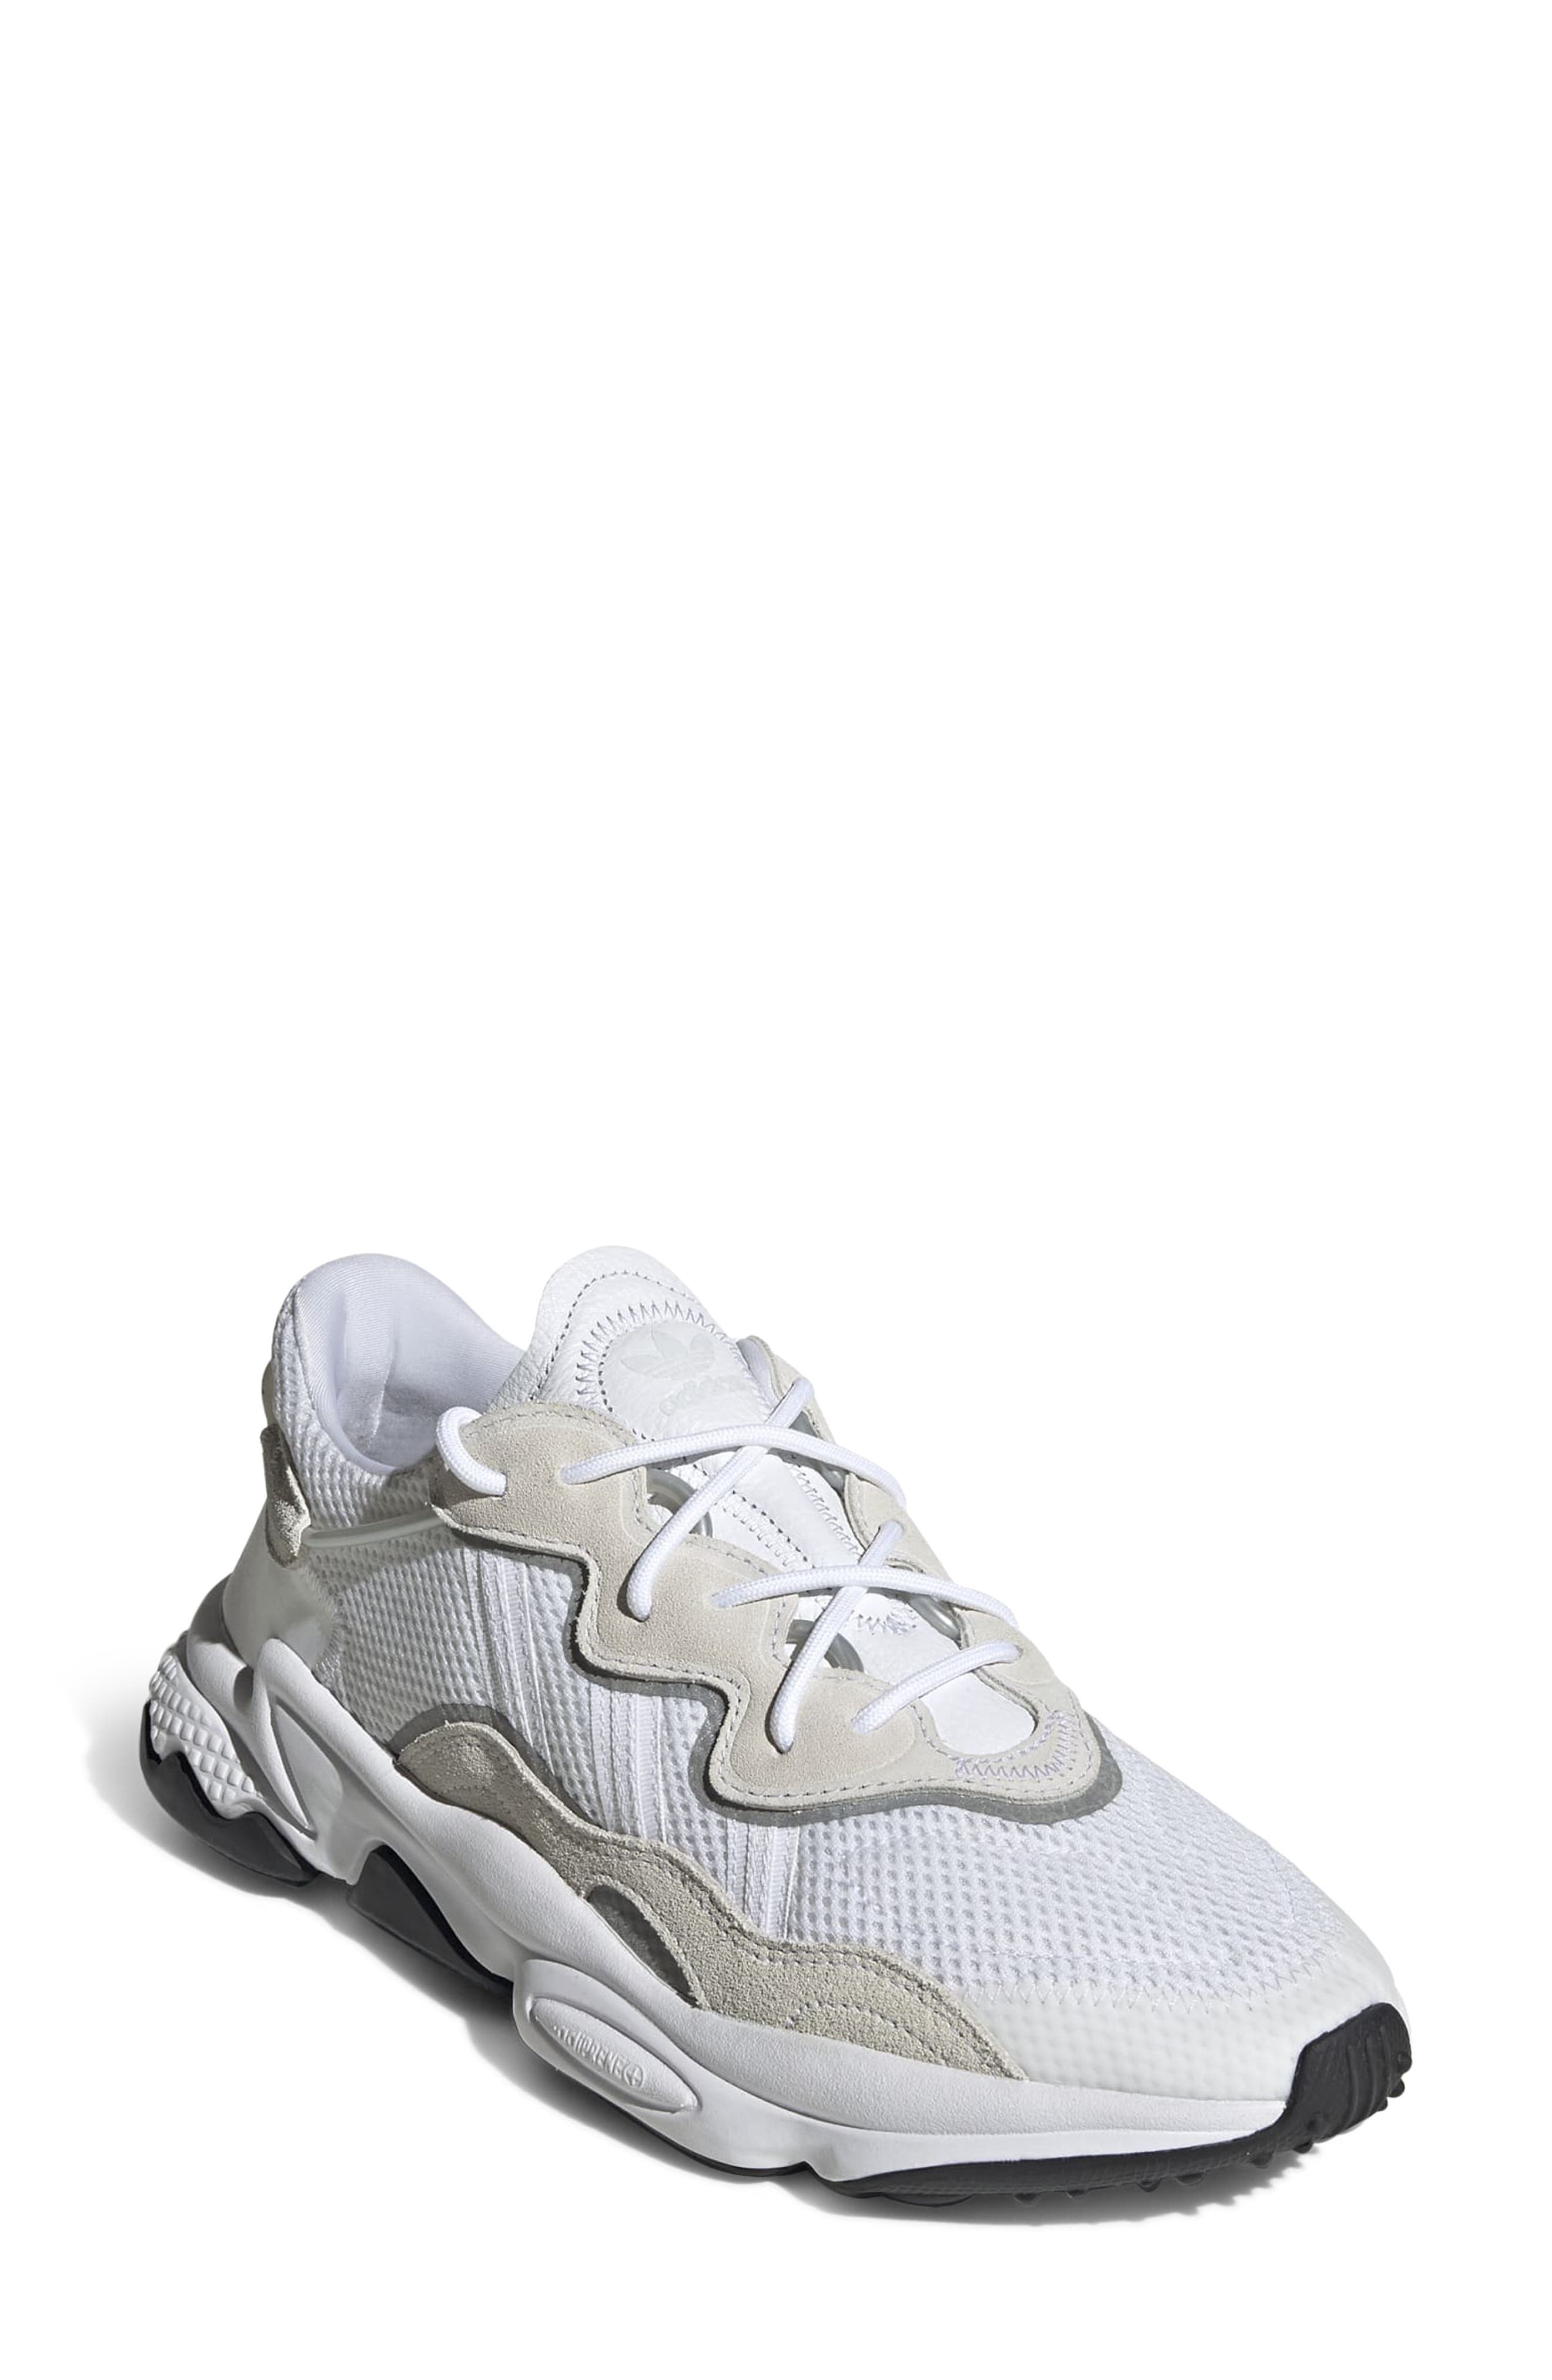 adidas X9000L4 COLD.RDY Running Shoe | Nordstrom